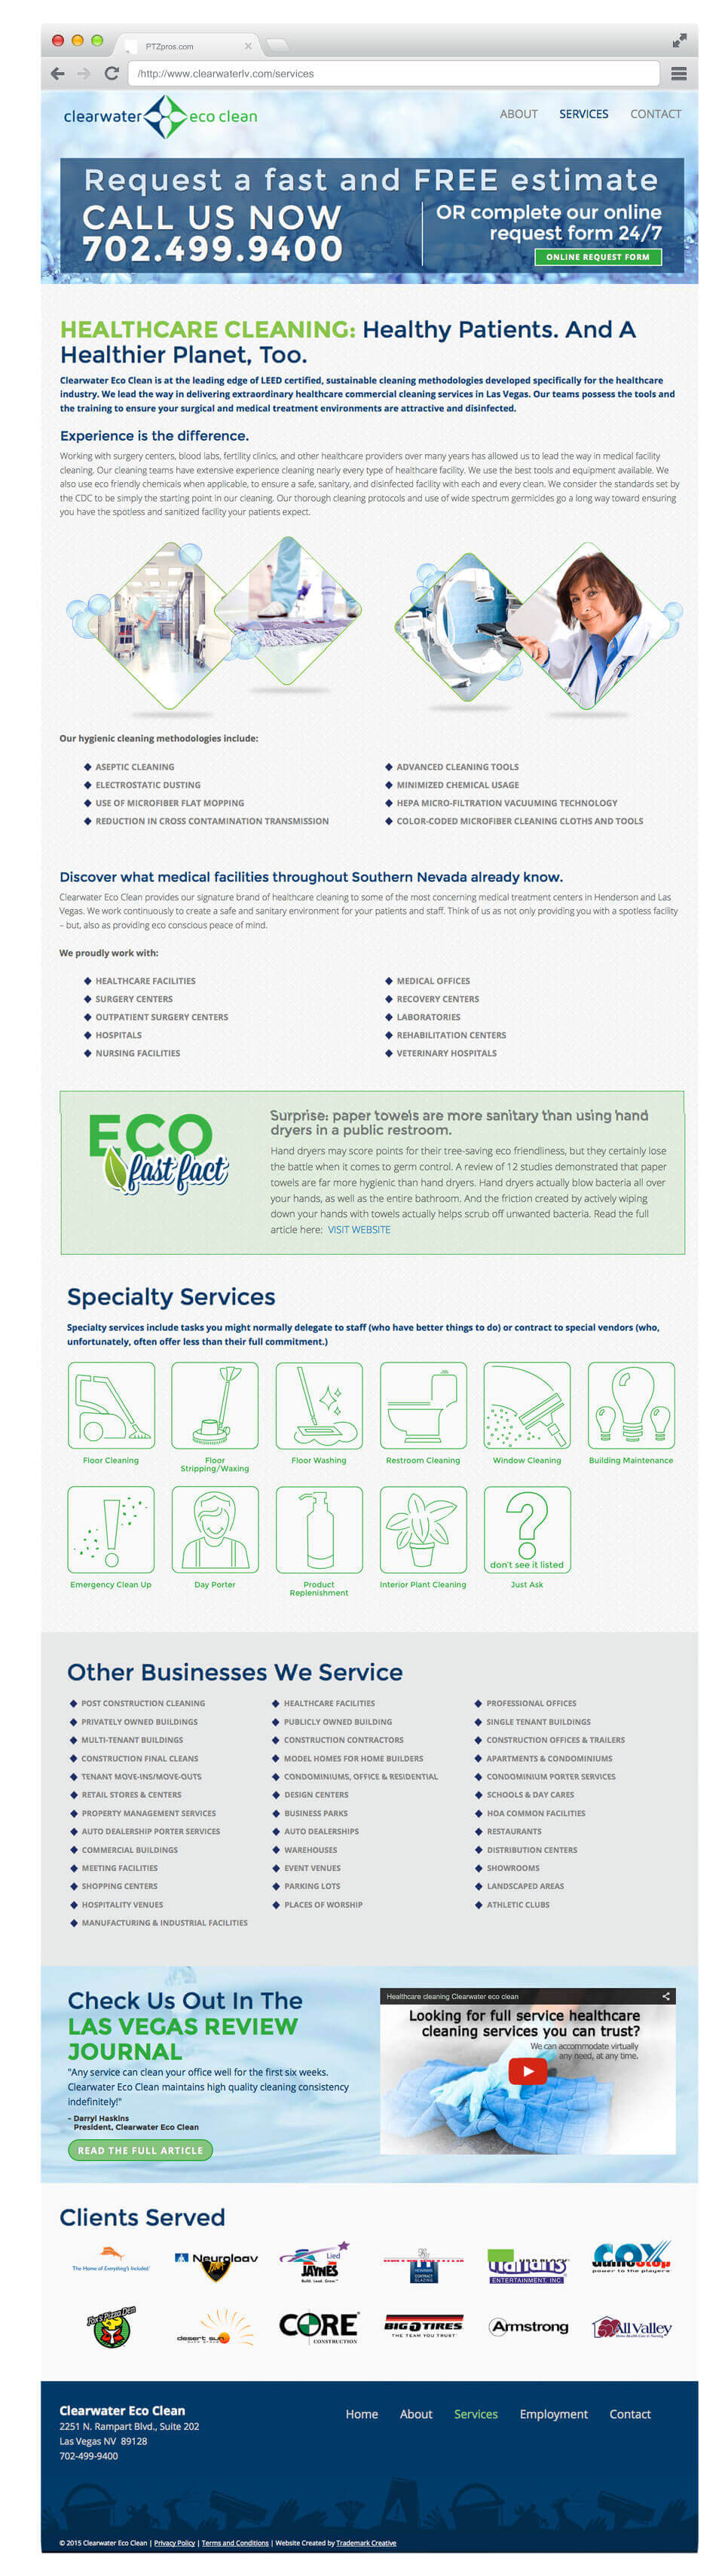 Clearwater Eco Clean - website sub 2